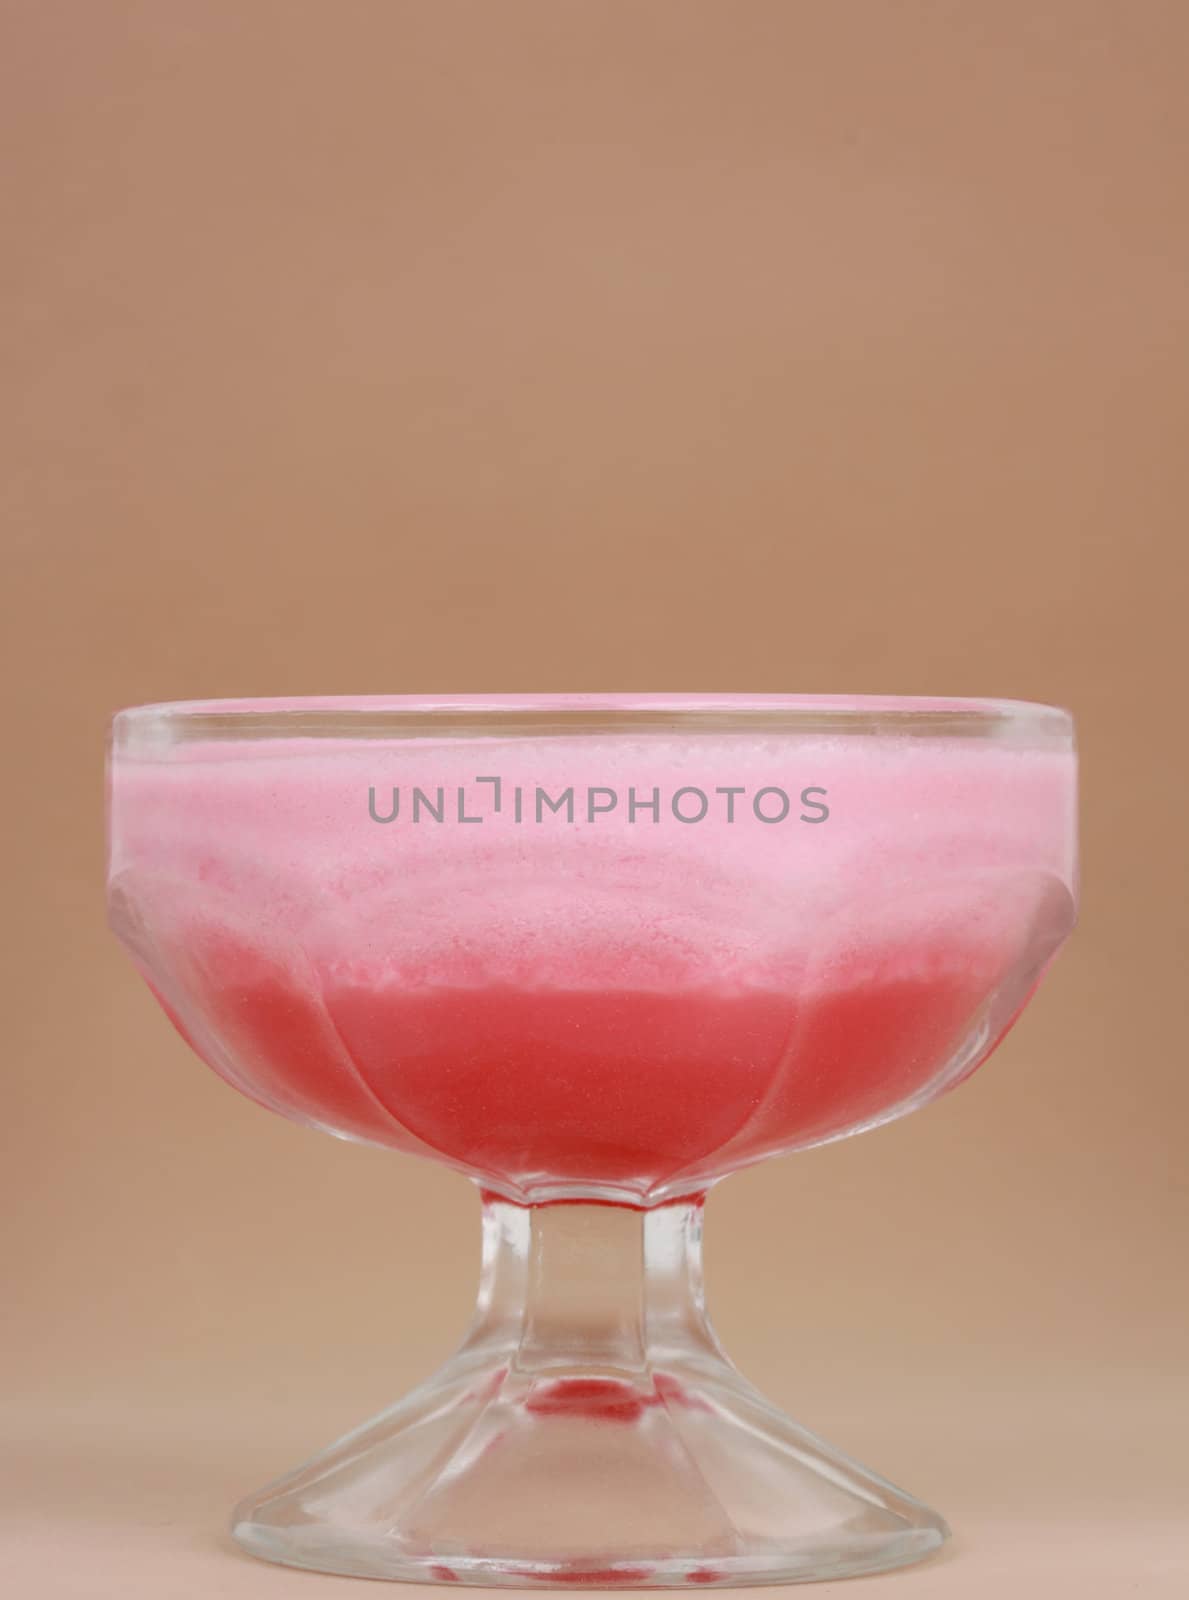 pink jelly and mousse dessert, beige background